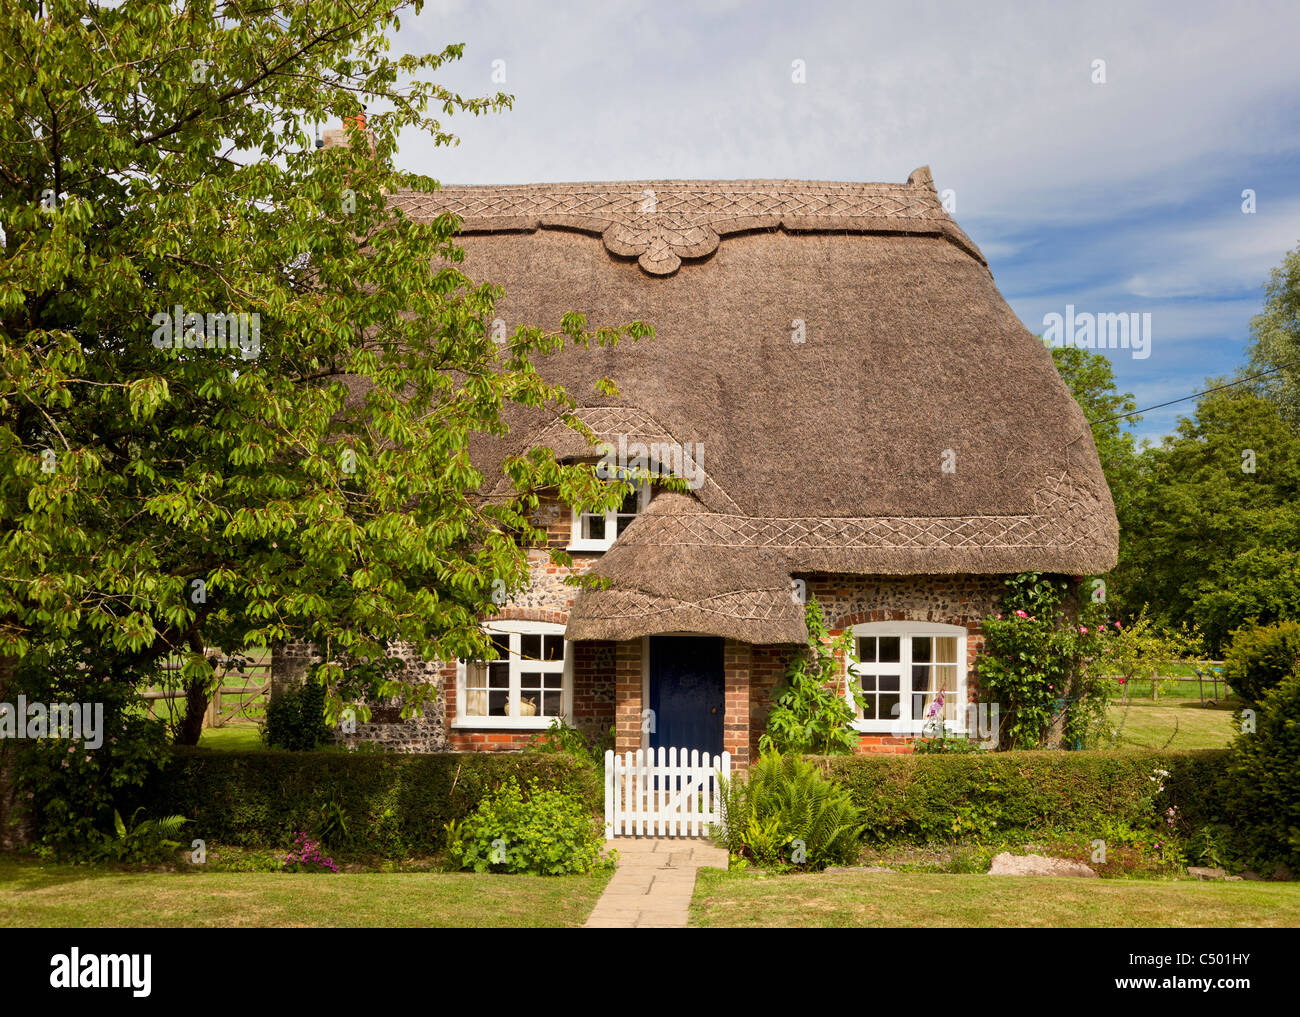 Tiny old thatched cottage in the pretty rural village of Tarrant Monkton, Dorset, England, UK Stock Photo